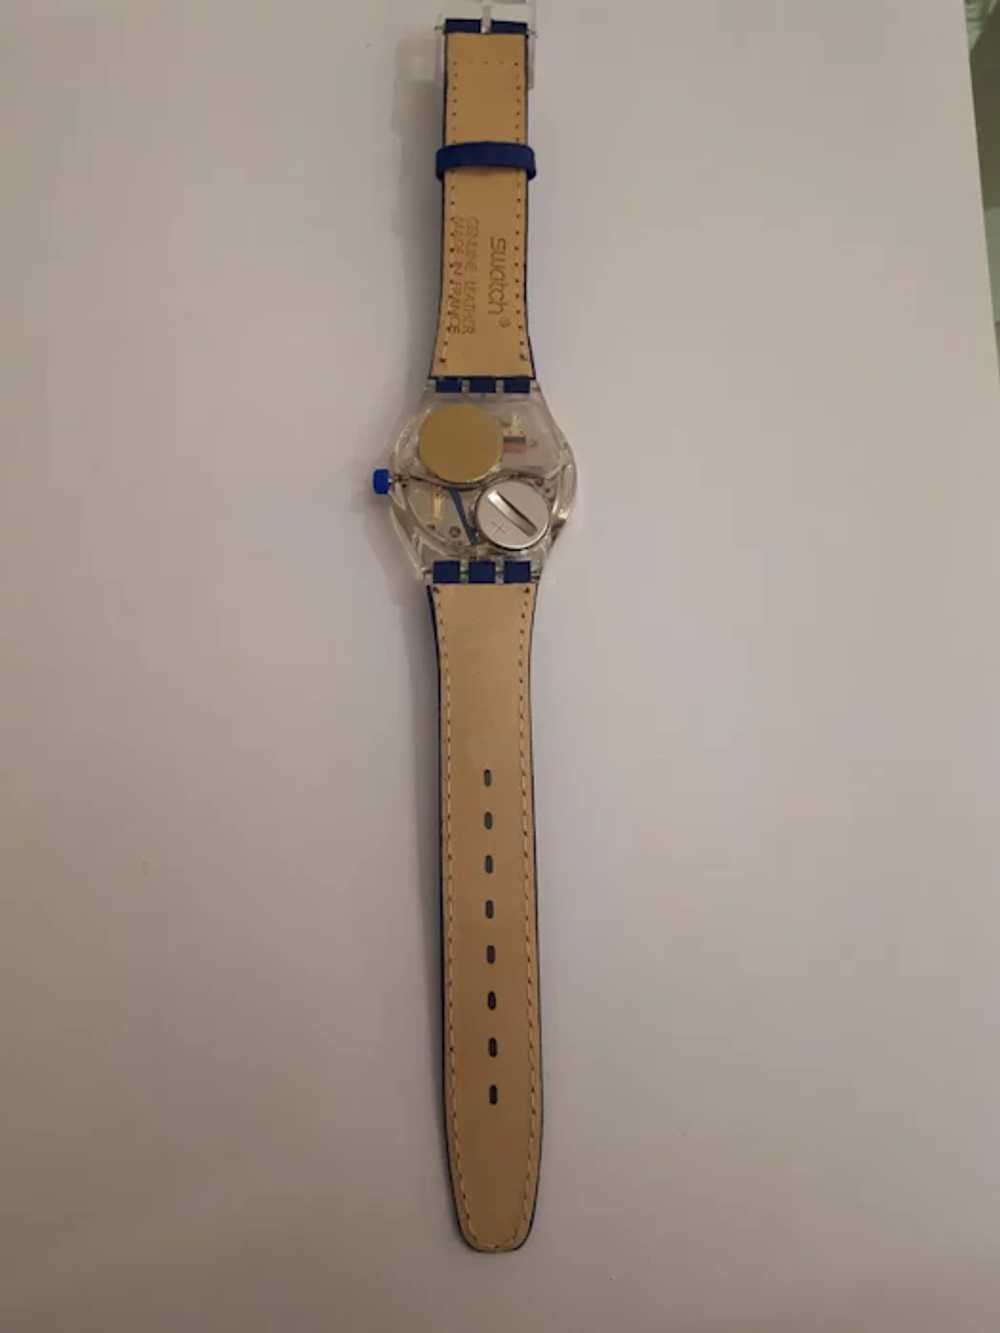 Swatch Watch Musicall SLK100 Tone in Blue 1993 Je… - image 5